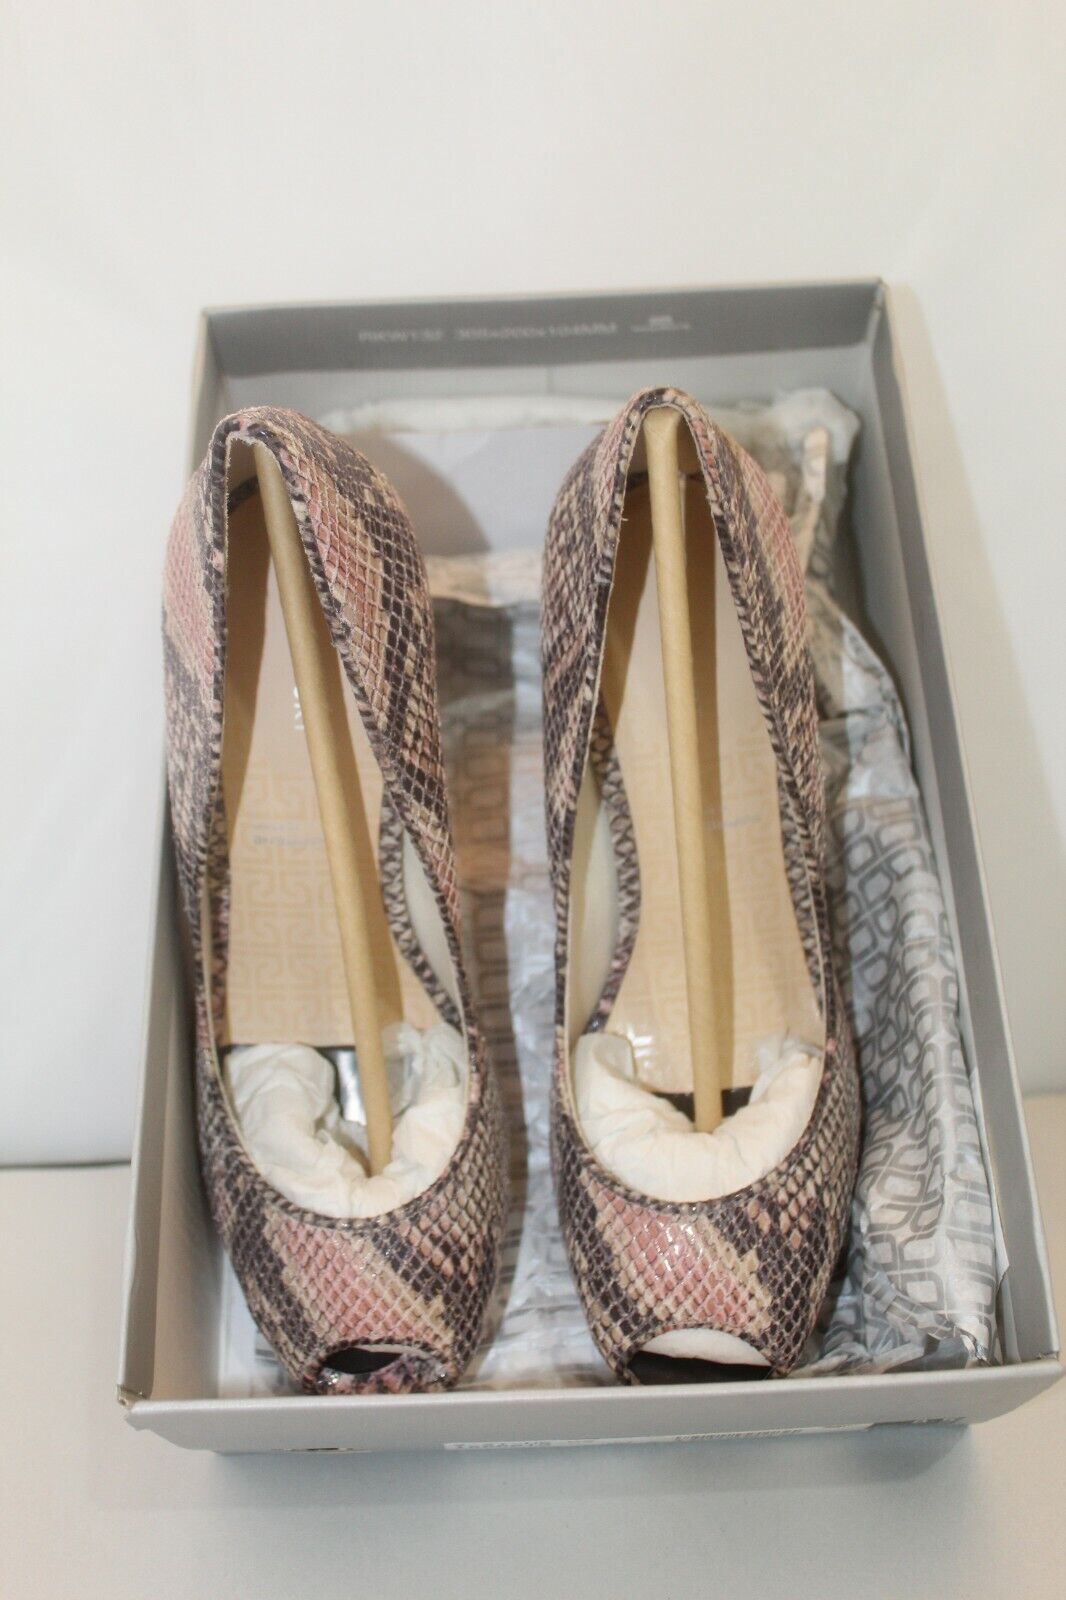 ROCKPORT Ladies Shoes High Stiletto Mary Jane Style Leather Snake Print Size 8.5